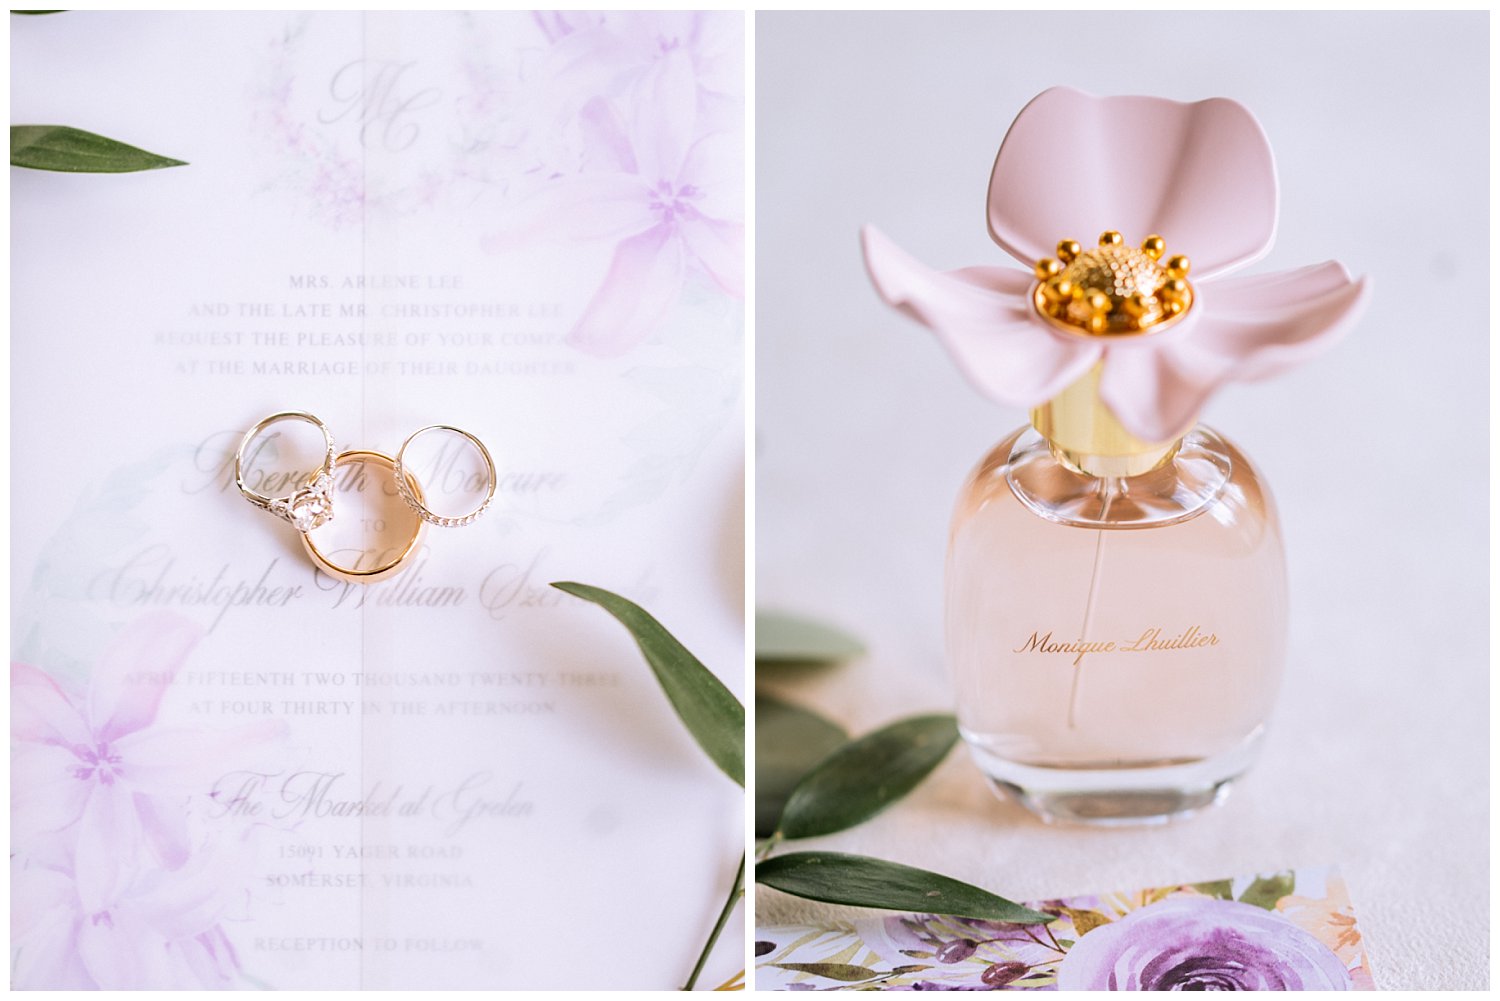 Invitation details for Spring Wedding at The Market at Grelen photographed by Heather Dodge Photography